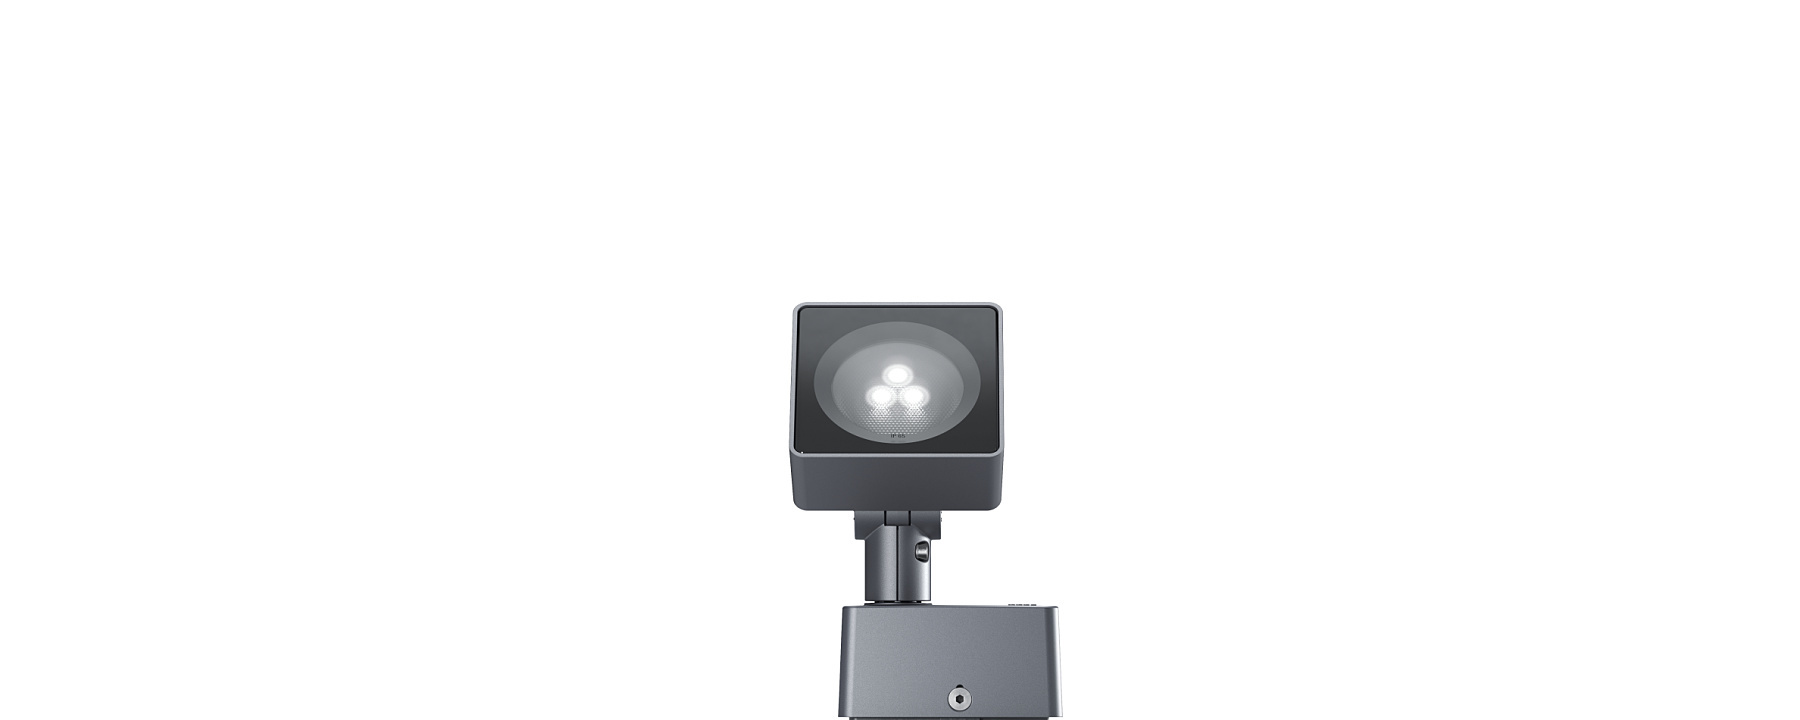 Lightscan - Projectors, floodlights and wallwashers